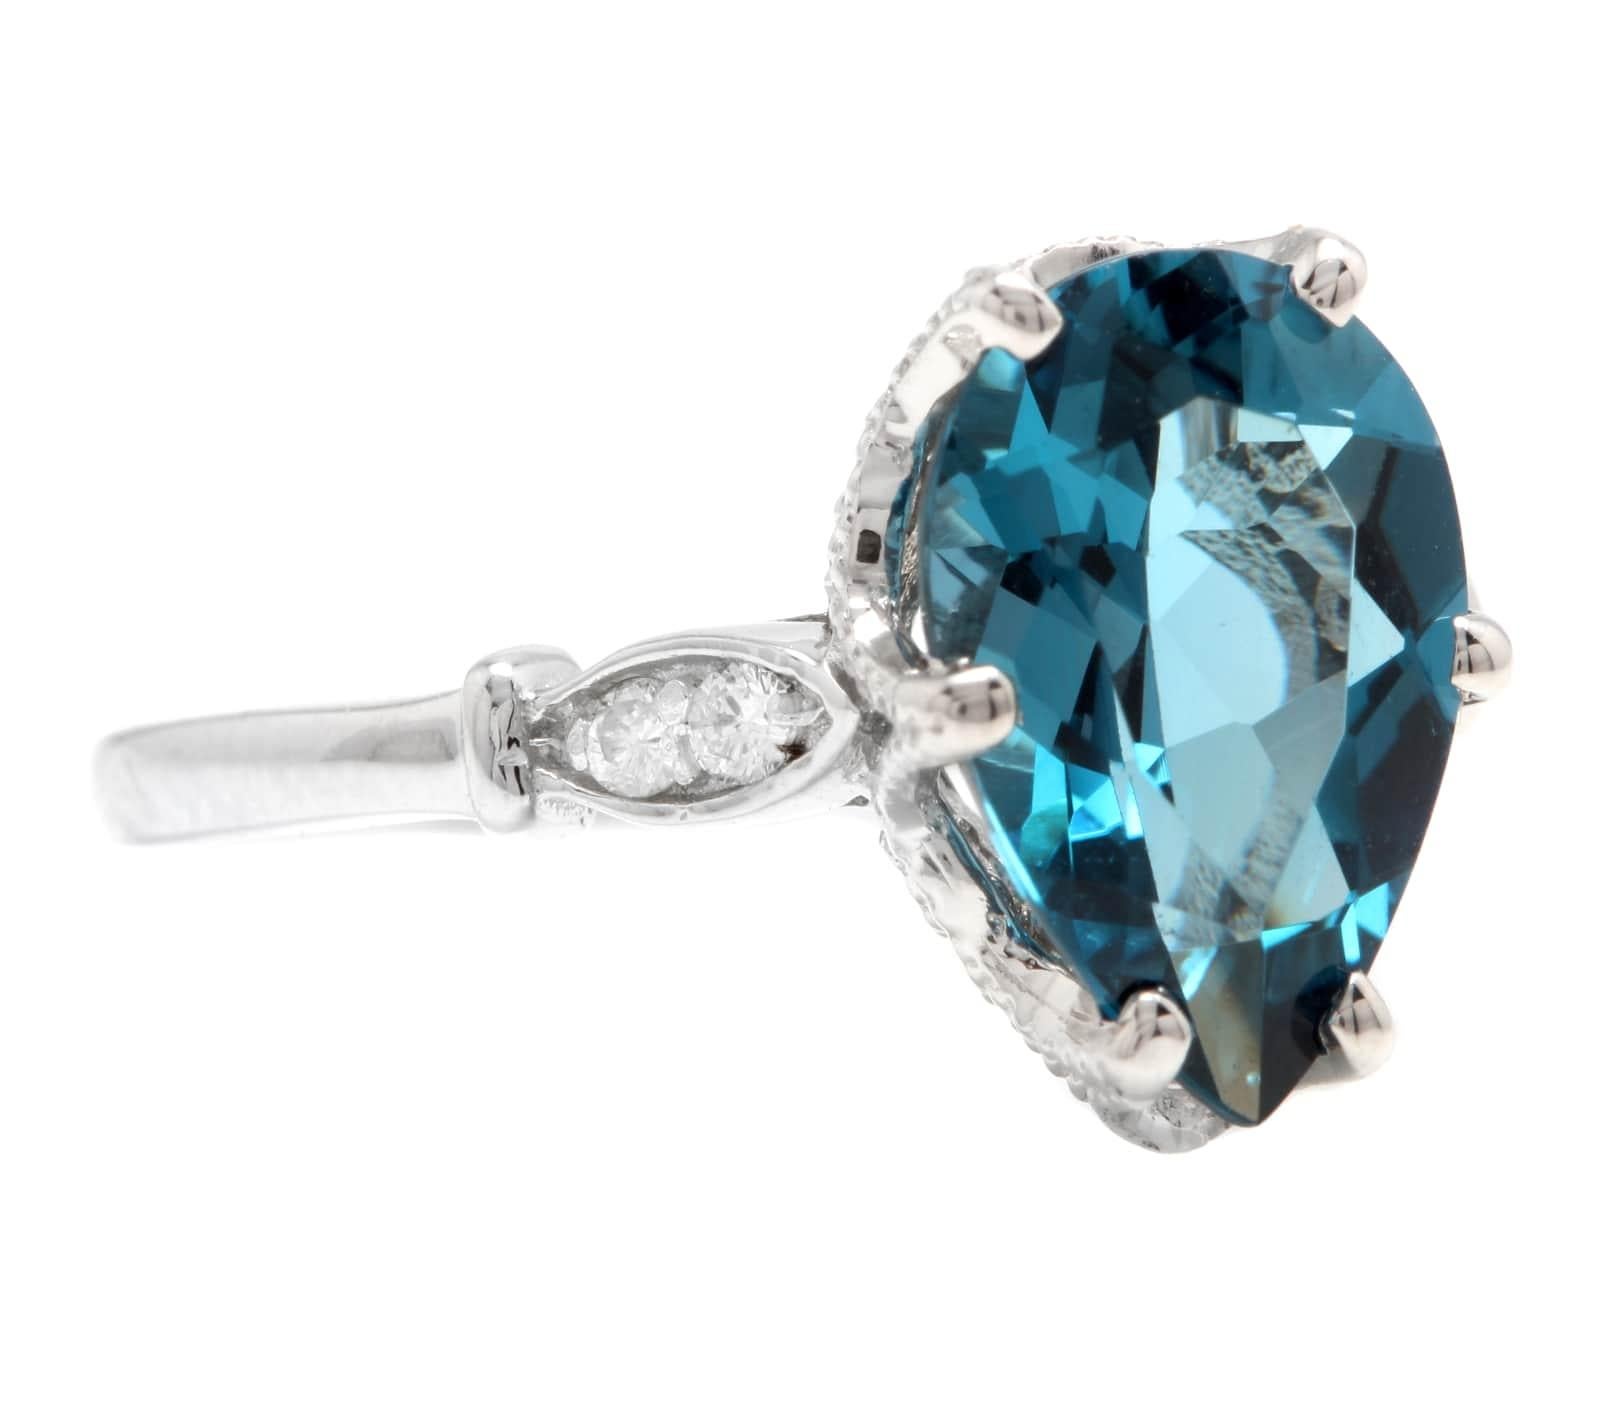 4.08 Carats Natural  Impressive London Blue Topaz and Diamond 14K Solid White Gold Ring

Suggested Replacement Value $2,500.00

Total Natural London Blue Topaz Weight is: Approx. 4.00 Carats 

London Blue Topaz Measures: Approx. 12.00 x